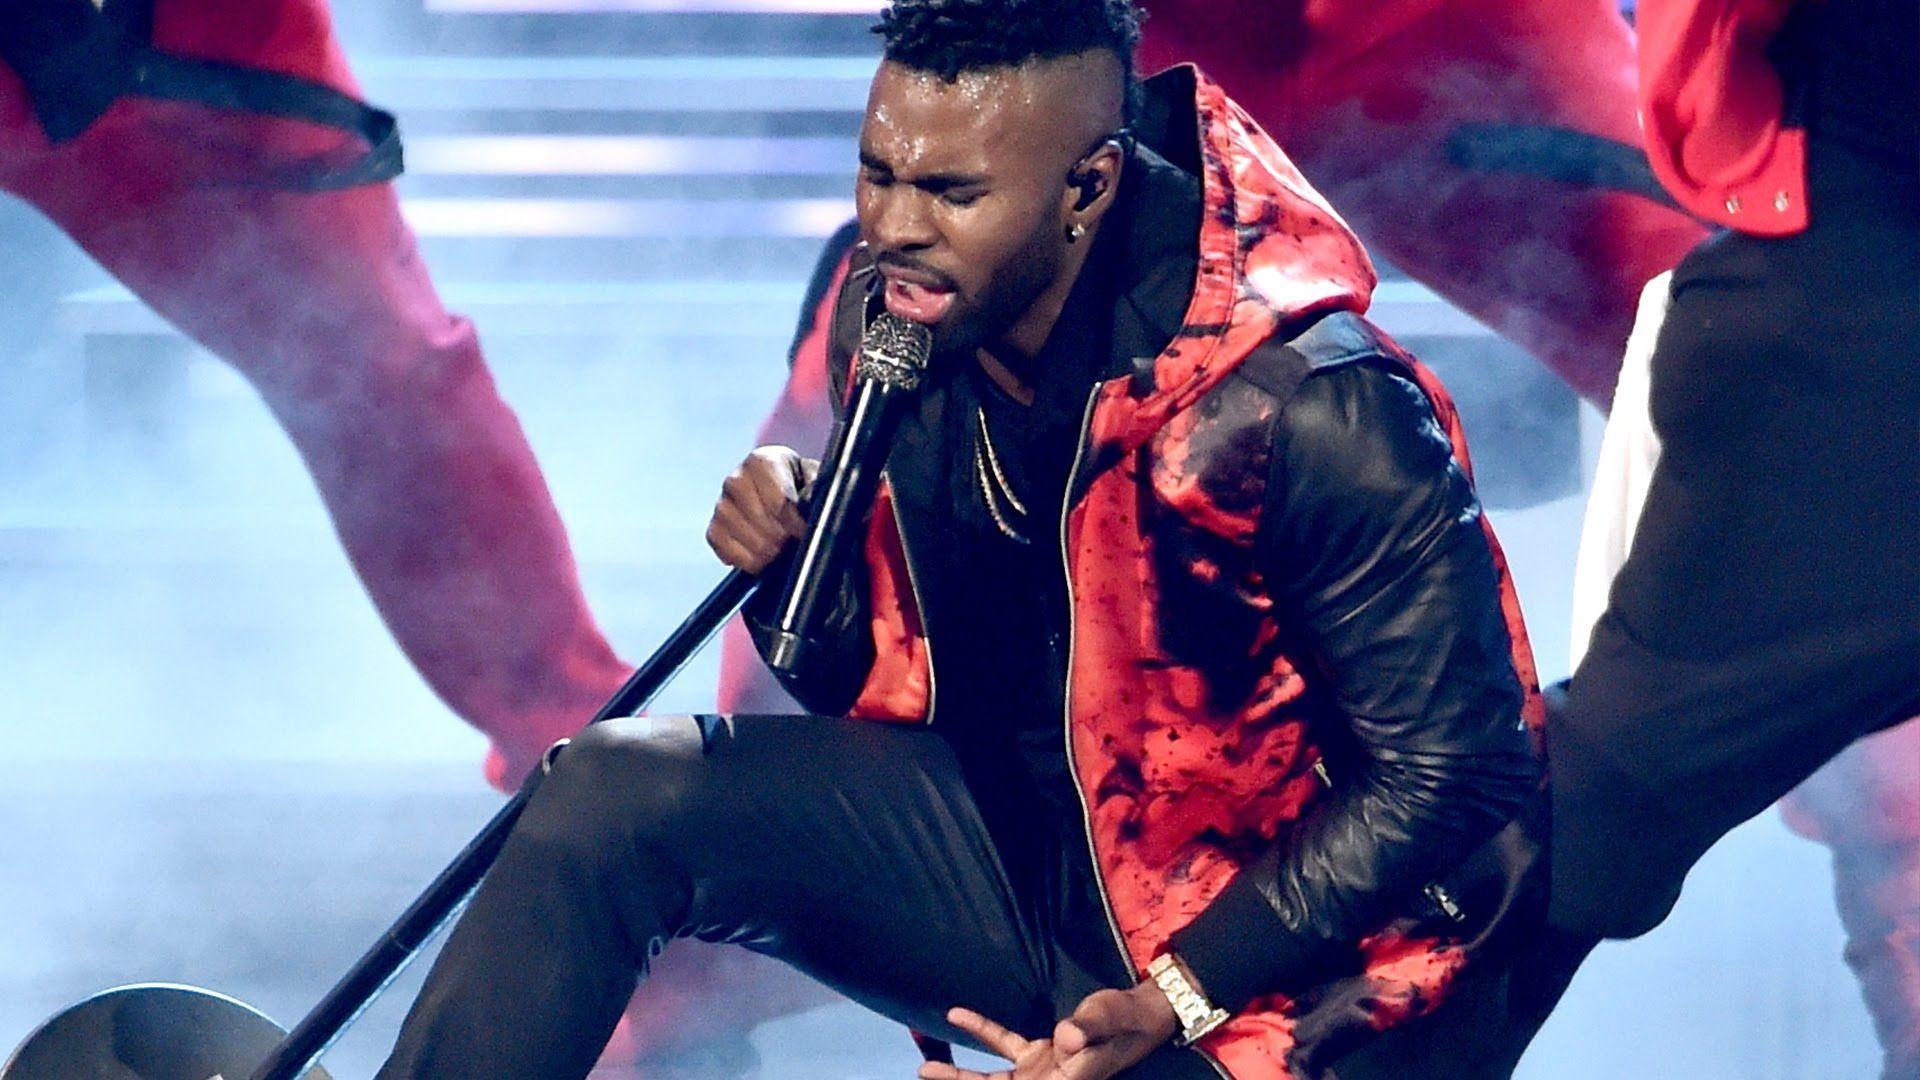 Jason Derulo Performs "Get Ugly" & "Want To Want Me" At 2016